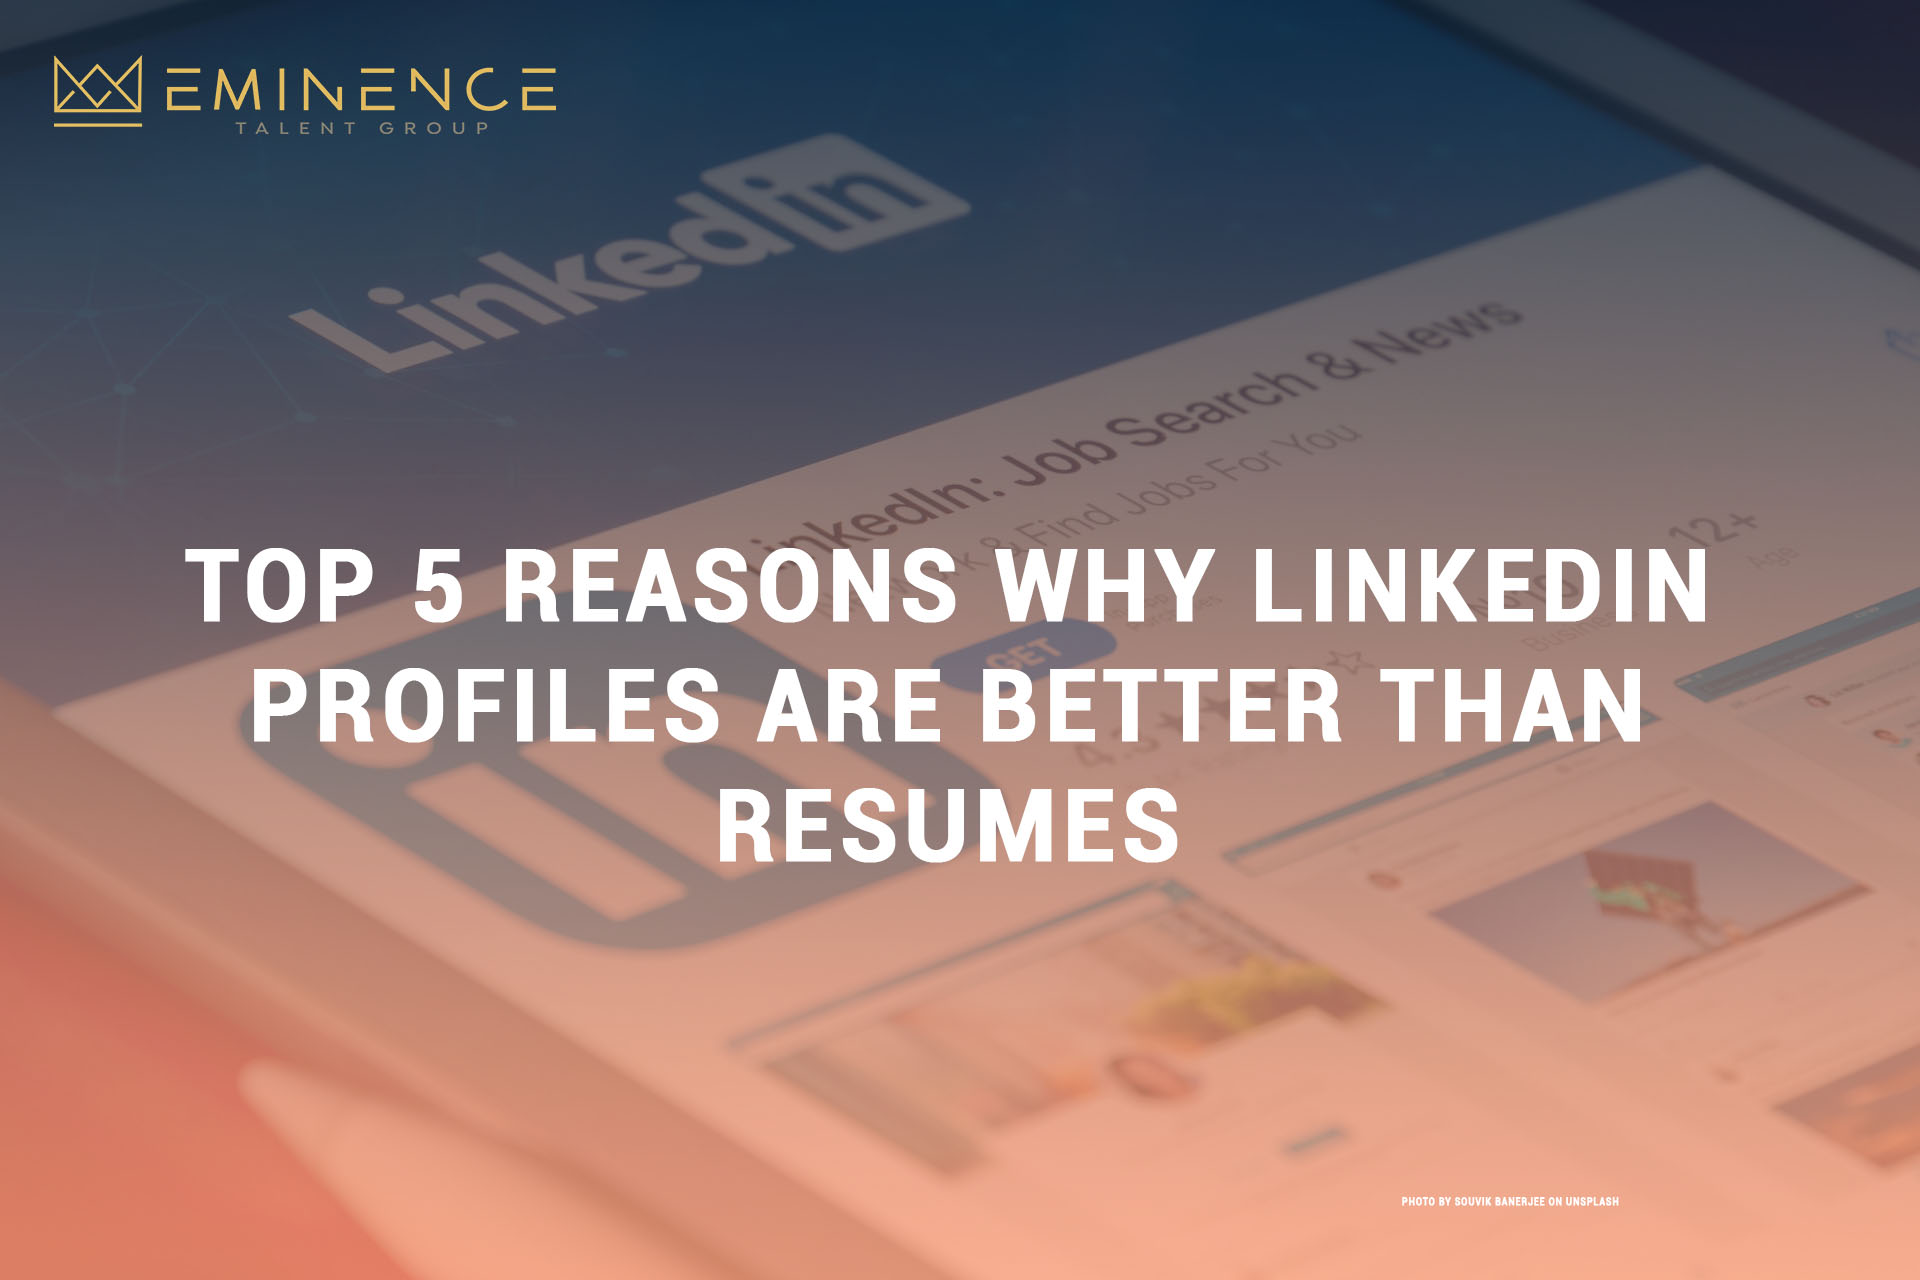 Top 5 Reasons Why LinkedIn Profiles Are Better Than Resumes